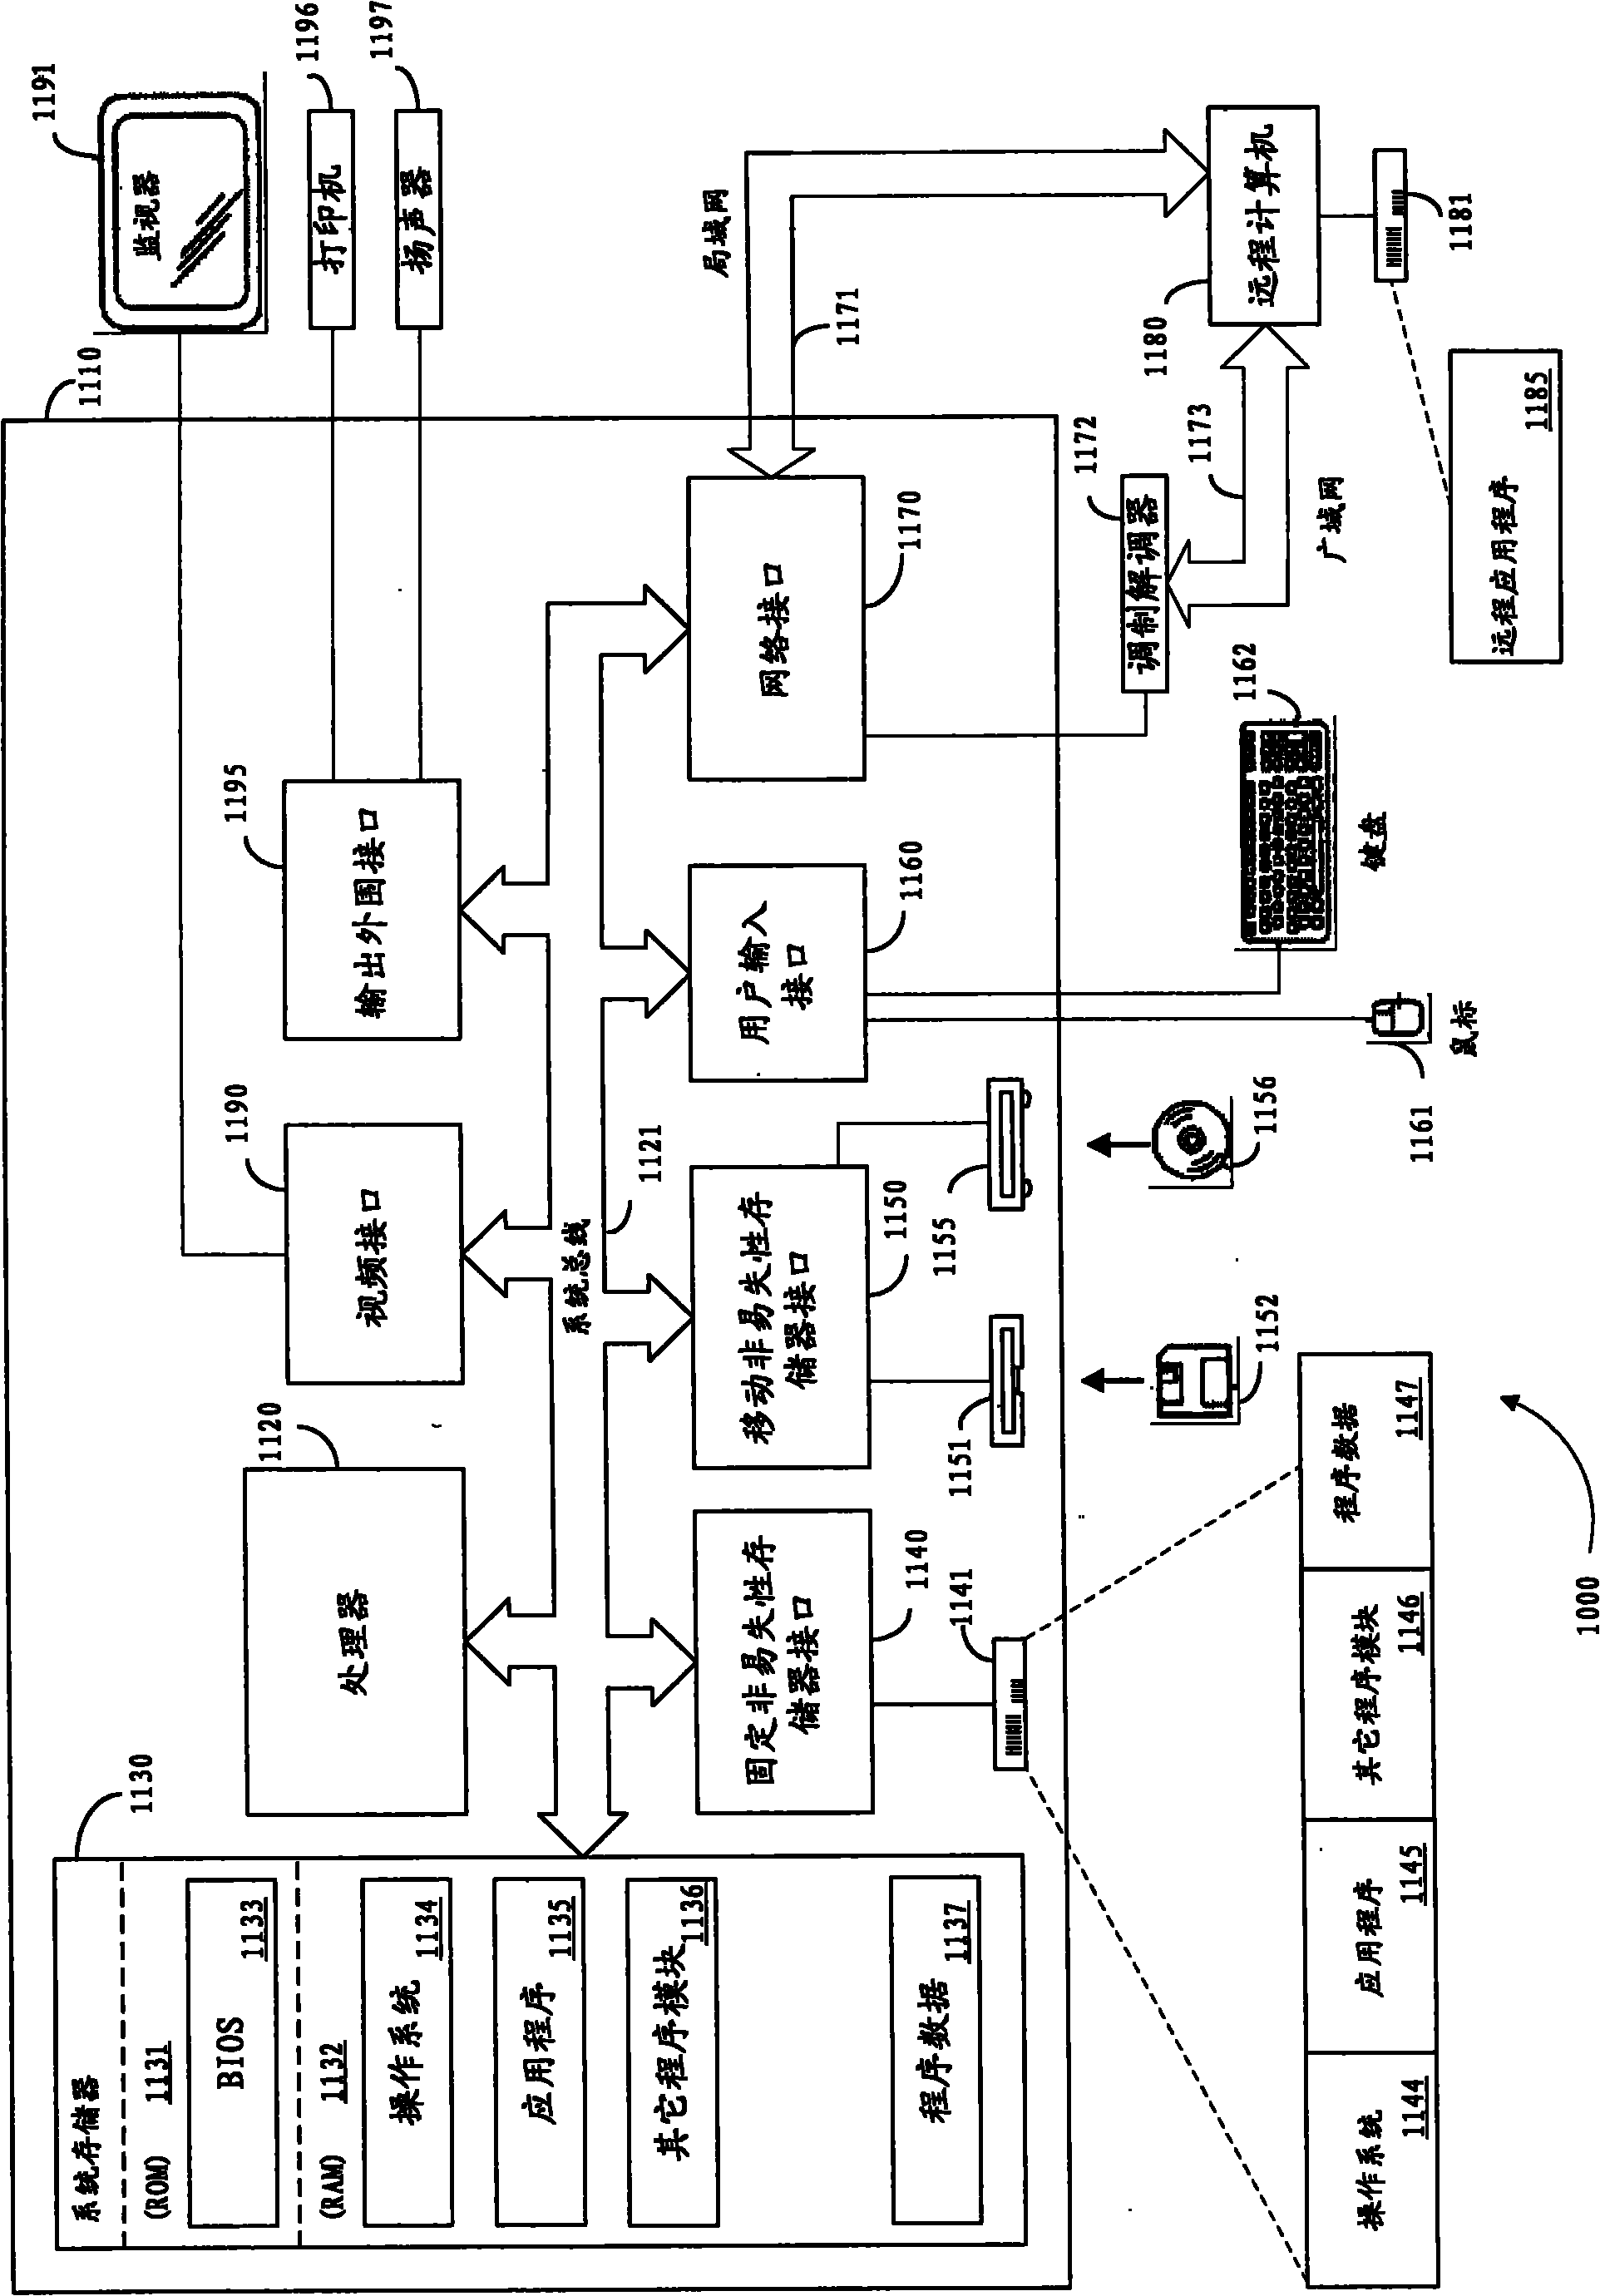 Command decoding device and method for disordered coded commands